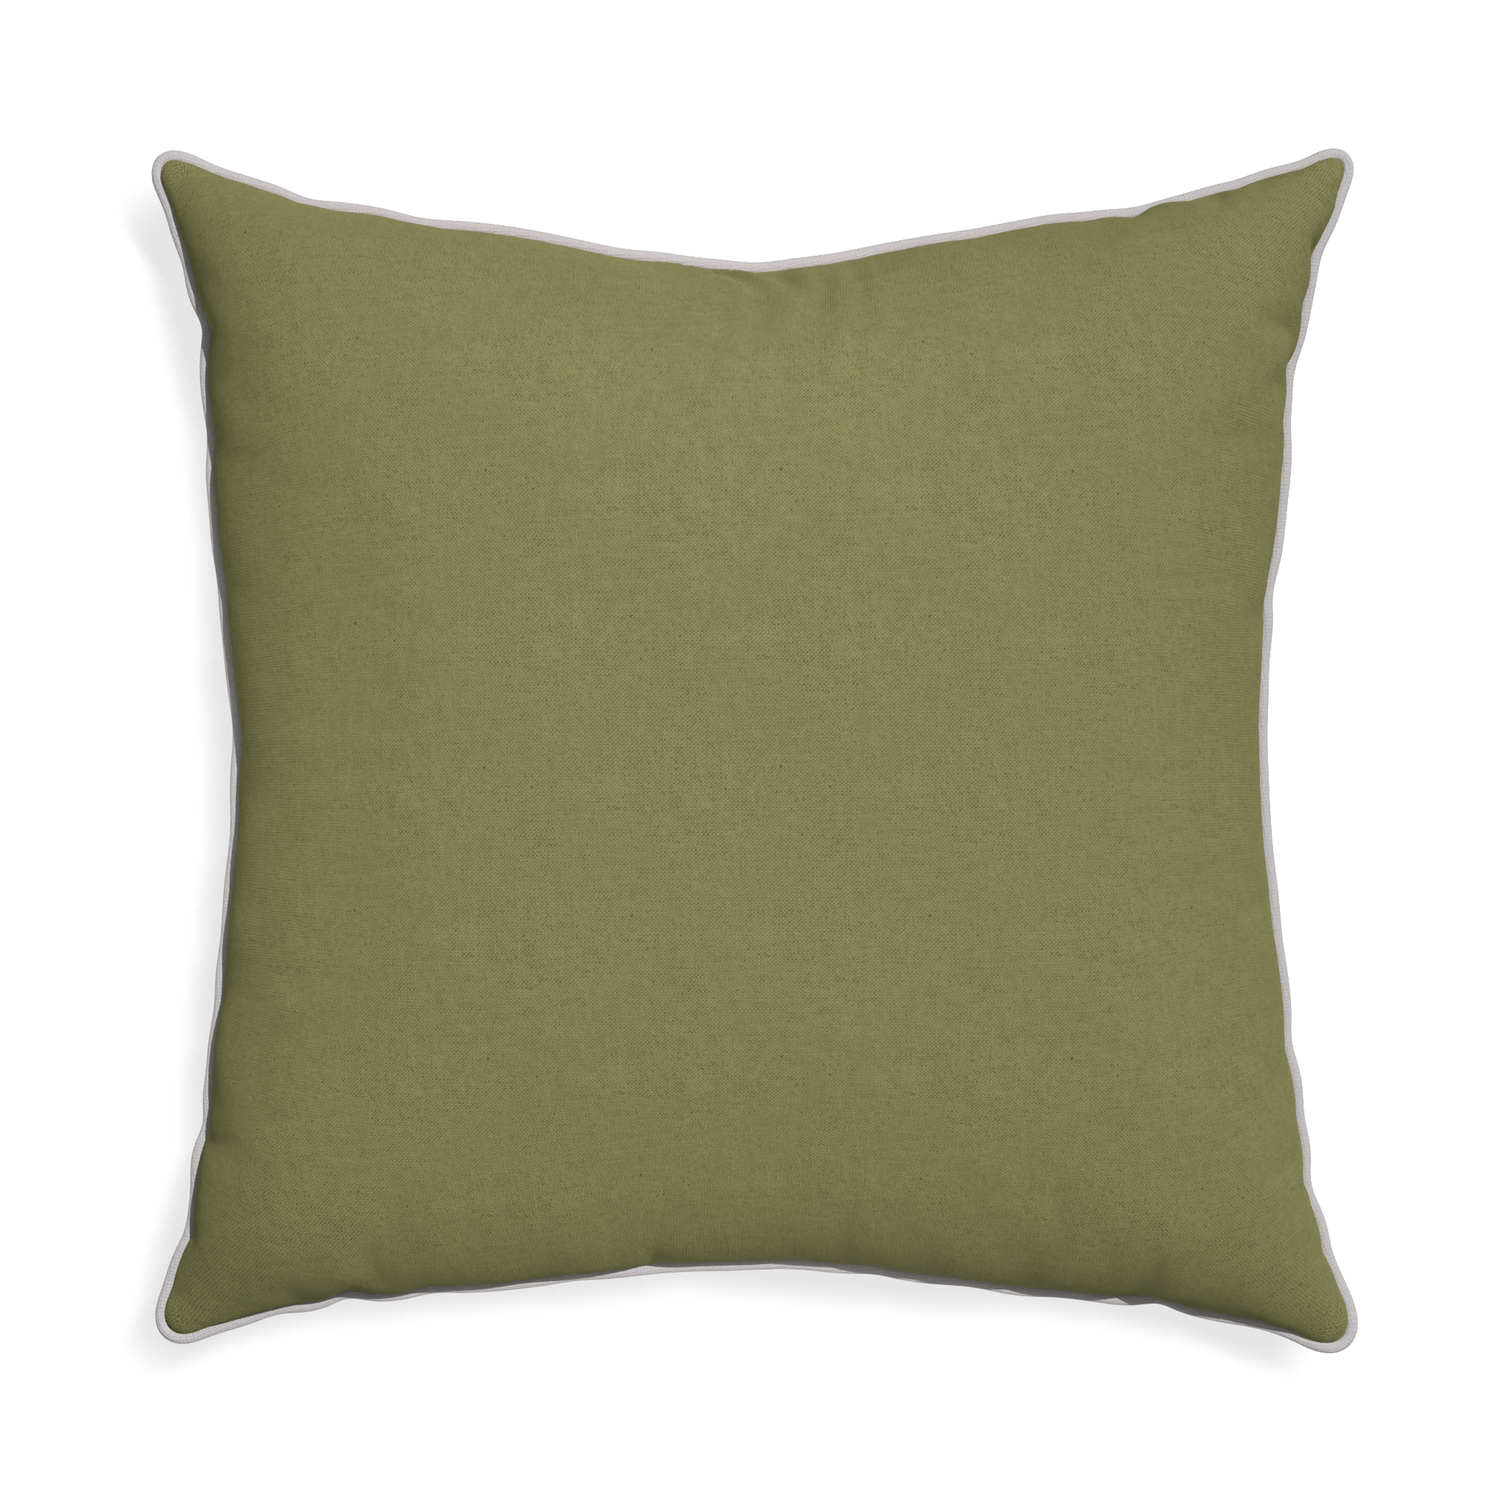 Euro-sham moss custom moss greenpillow with pebble piping on white background